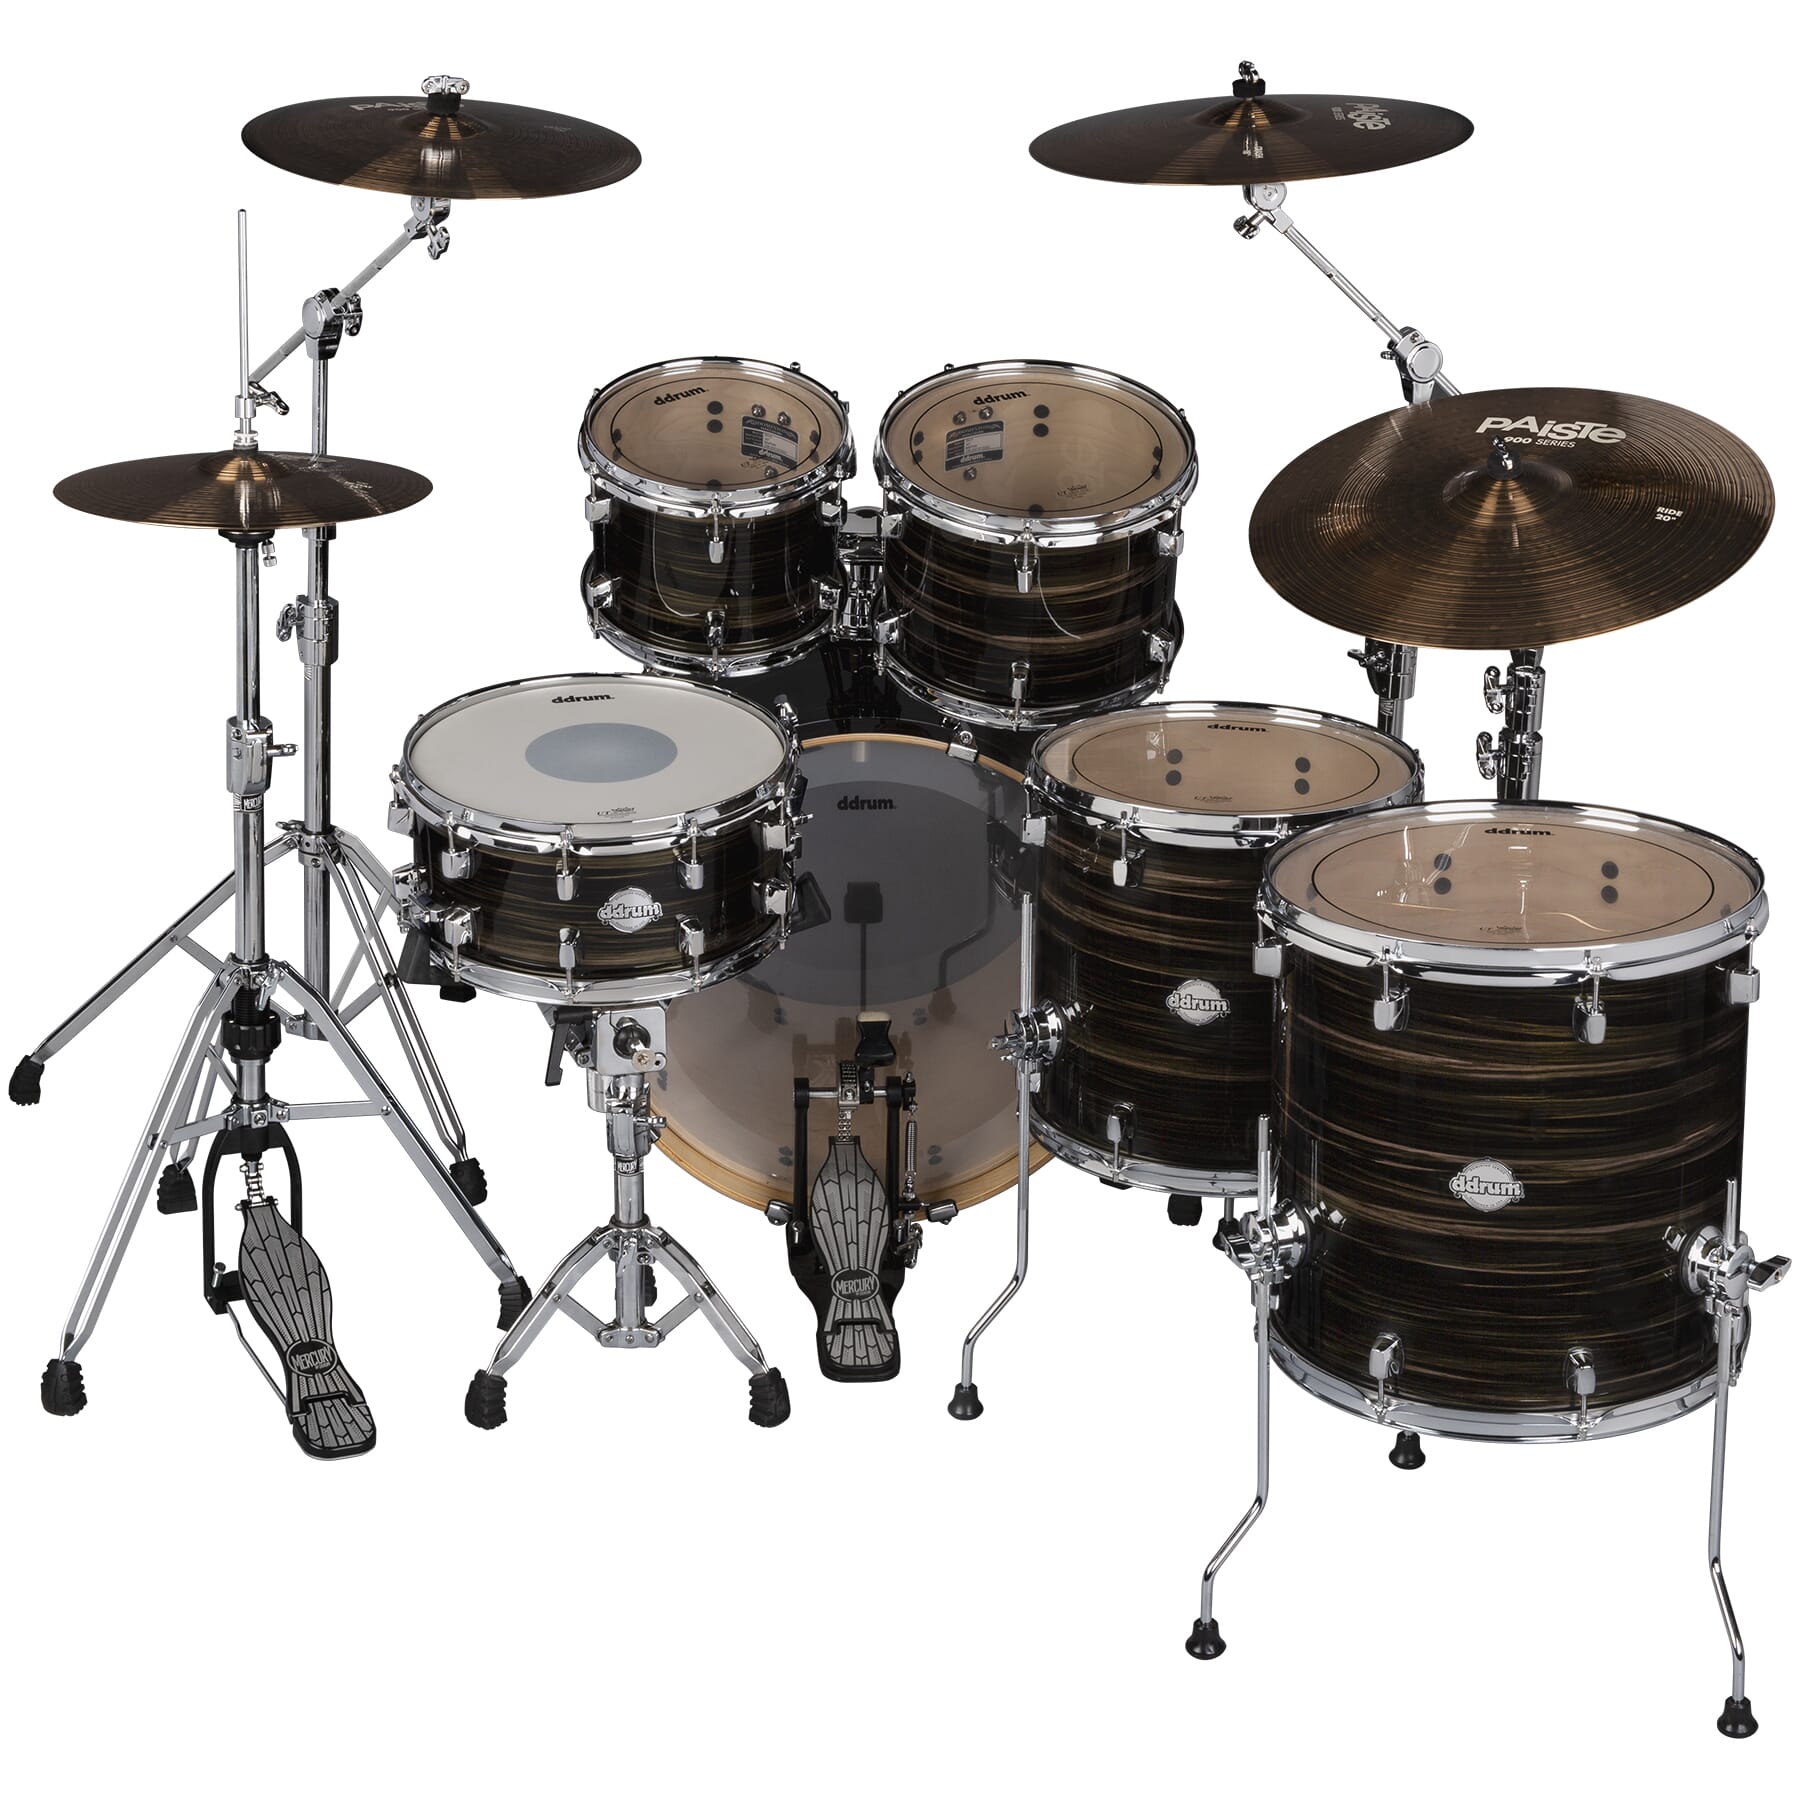 Dominion Birch 6pc Shell Pack Brushed Olive Metallic Wrap | ddrum